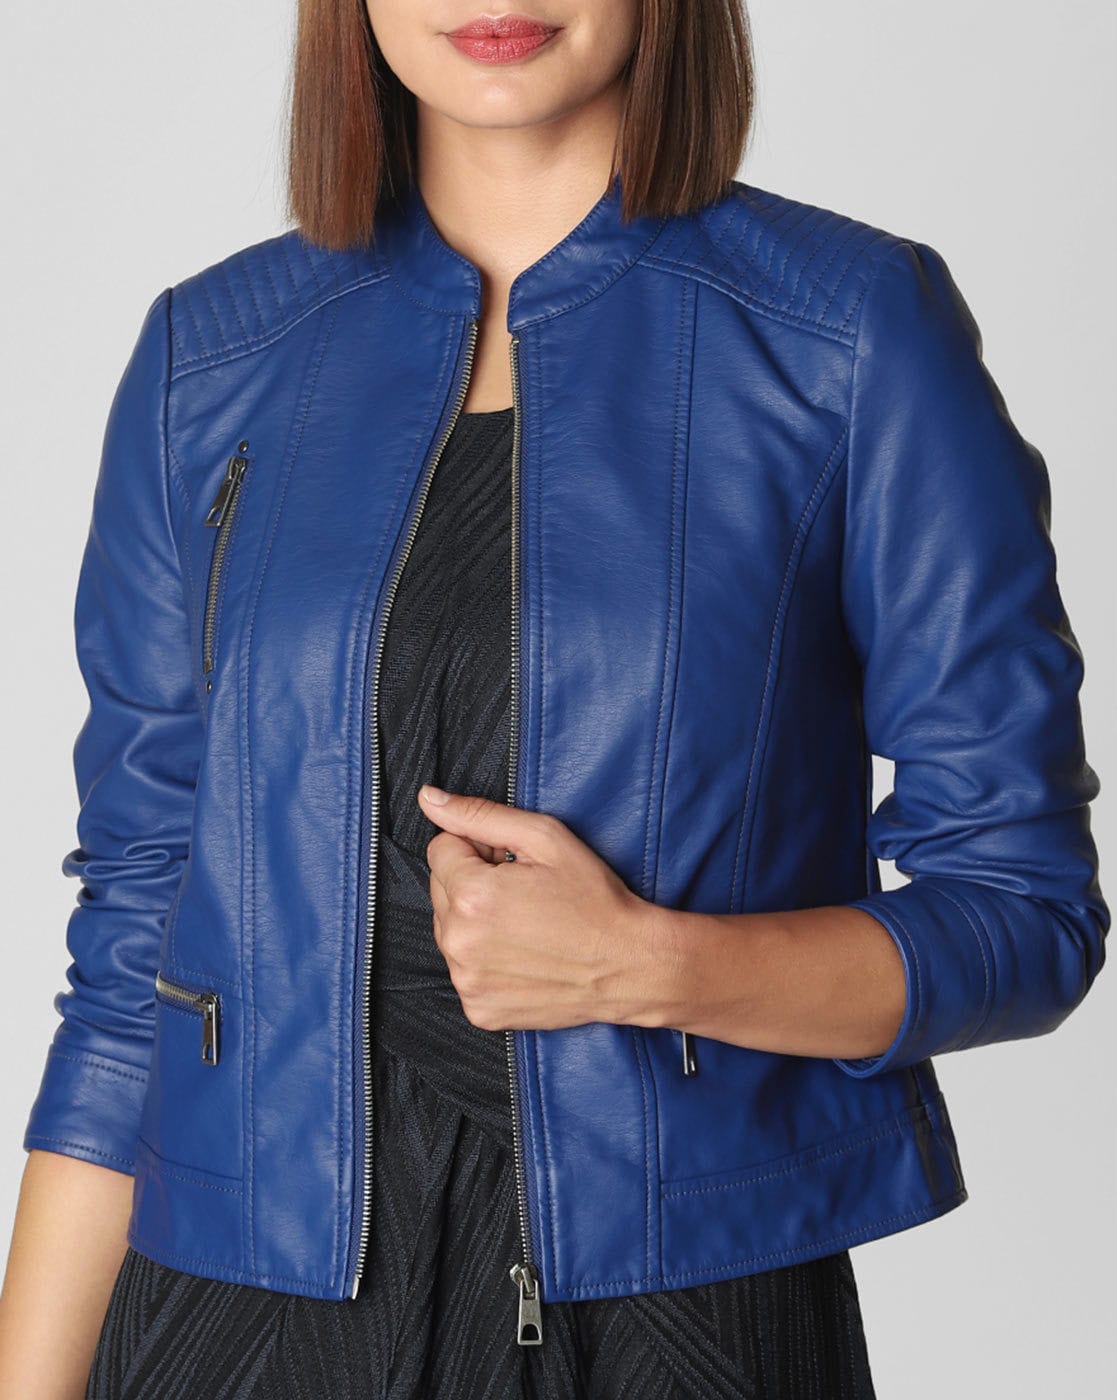 Buy Royal Blue Jackets & for Women by Vero Moda Online |